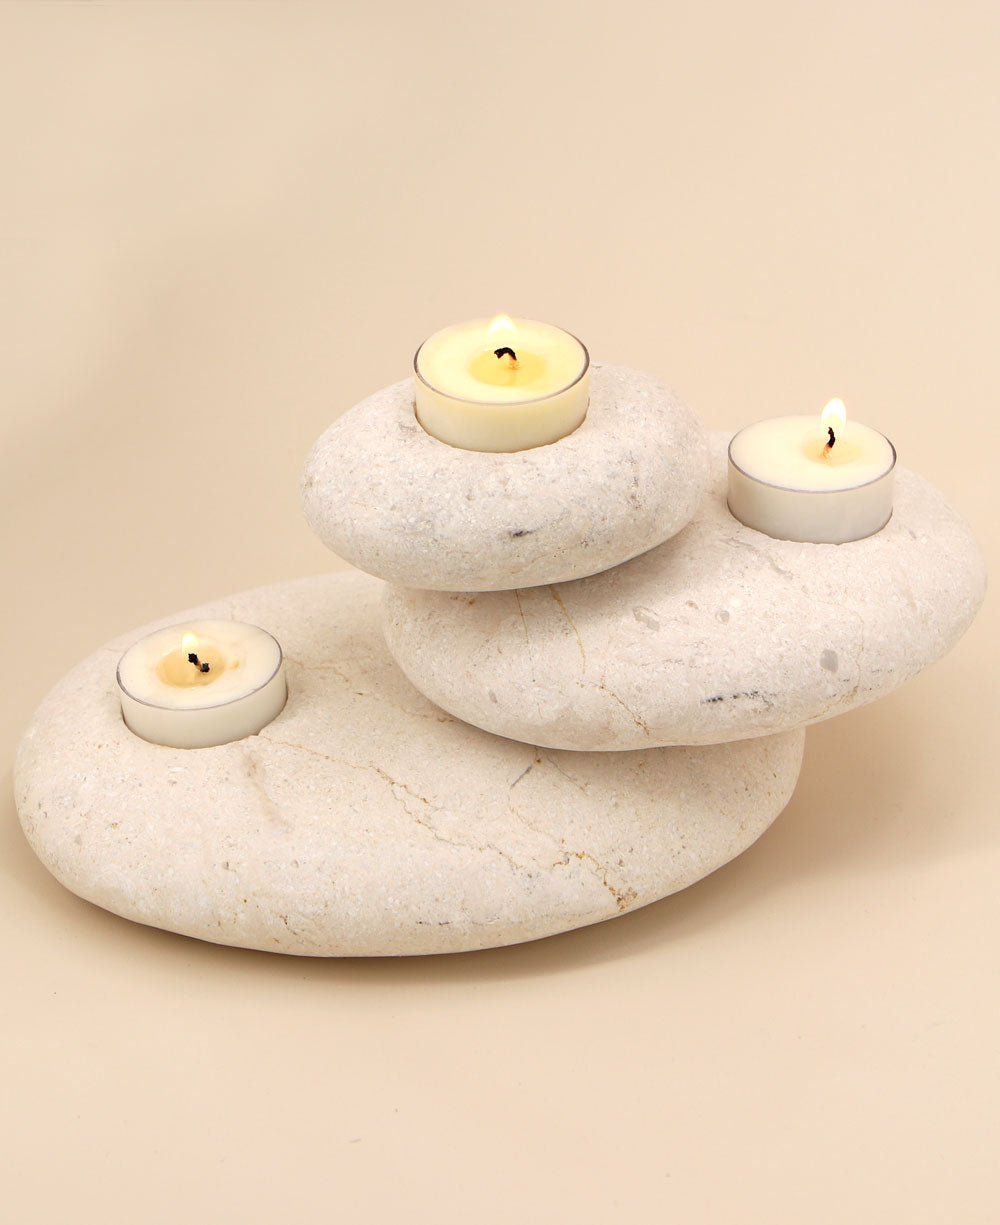 Stone Finish Cairn Tealight Candle Holder - Candle Holders